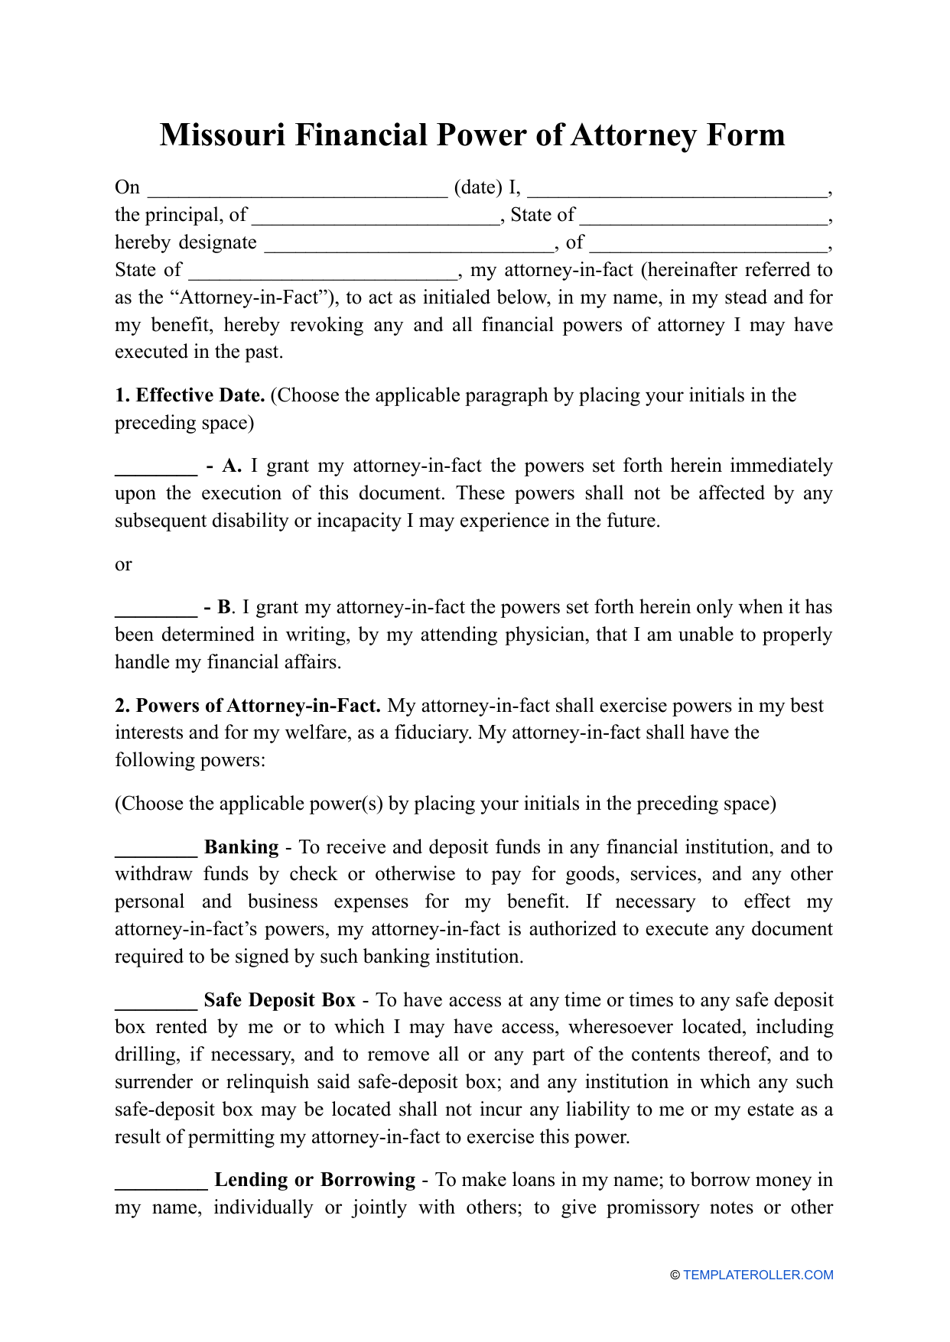 Financial Power of Attorney Form - Missouri, Page 1